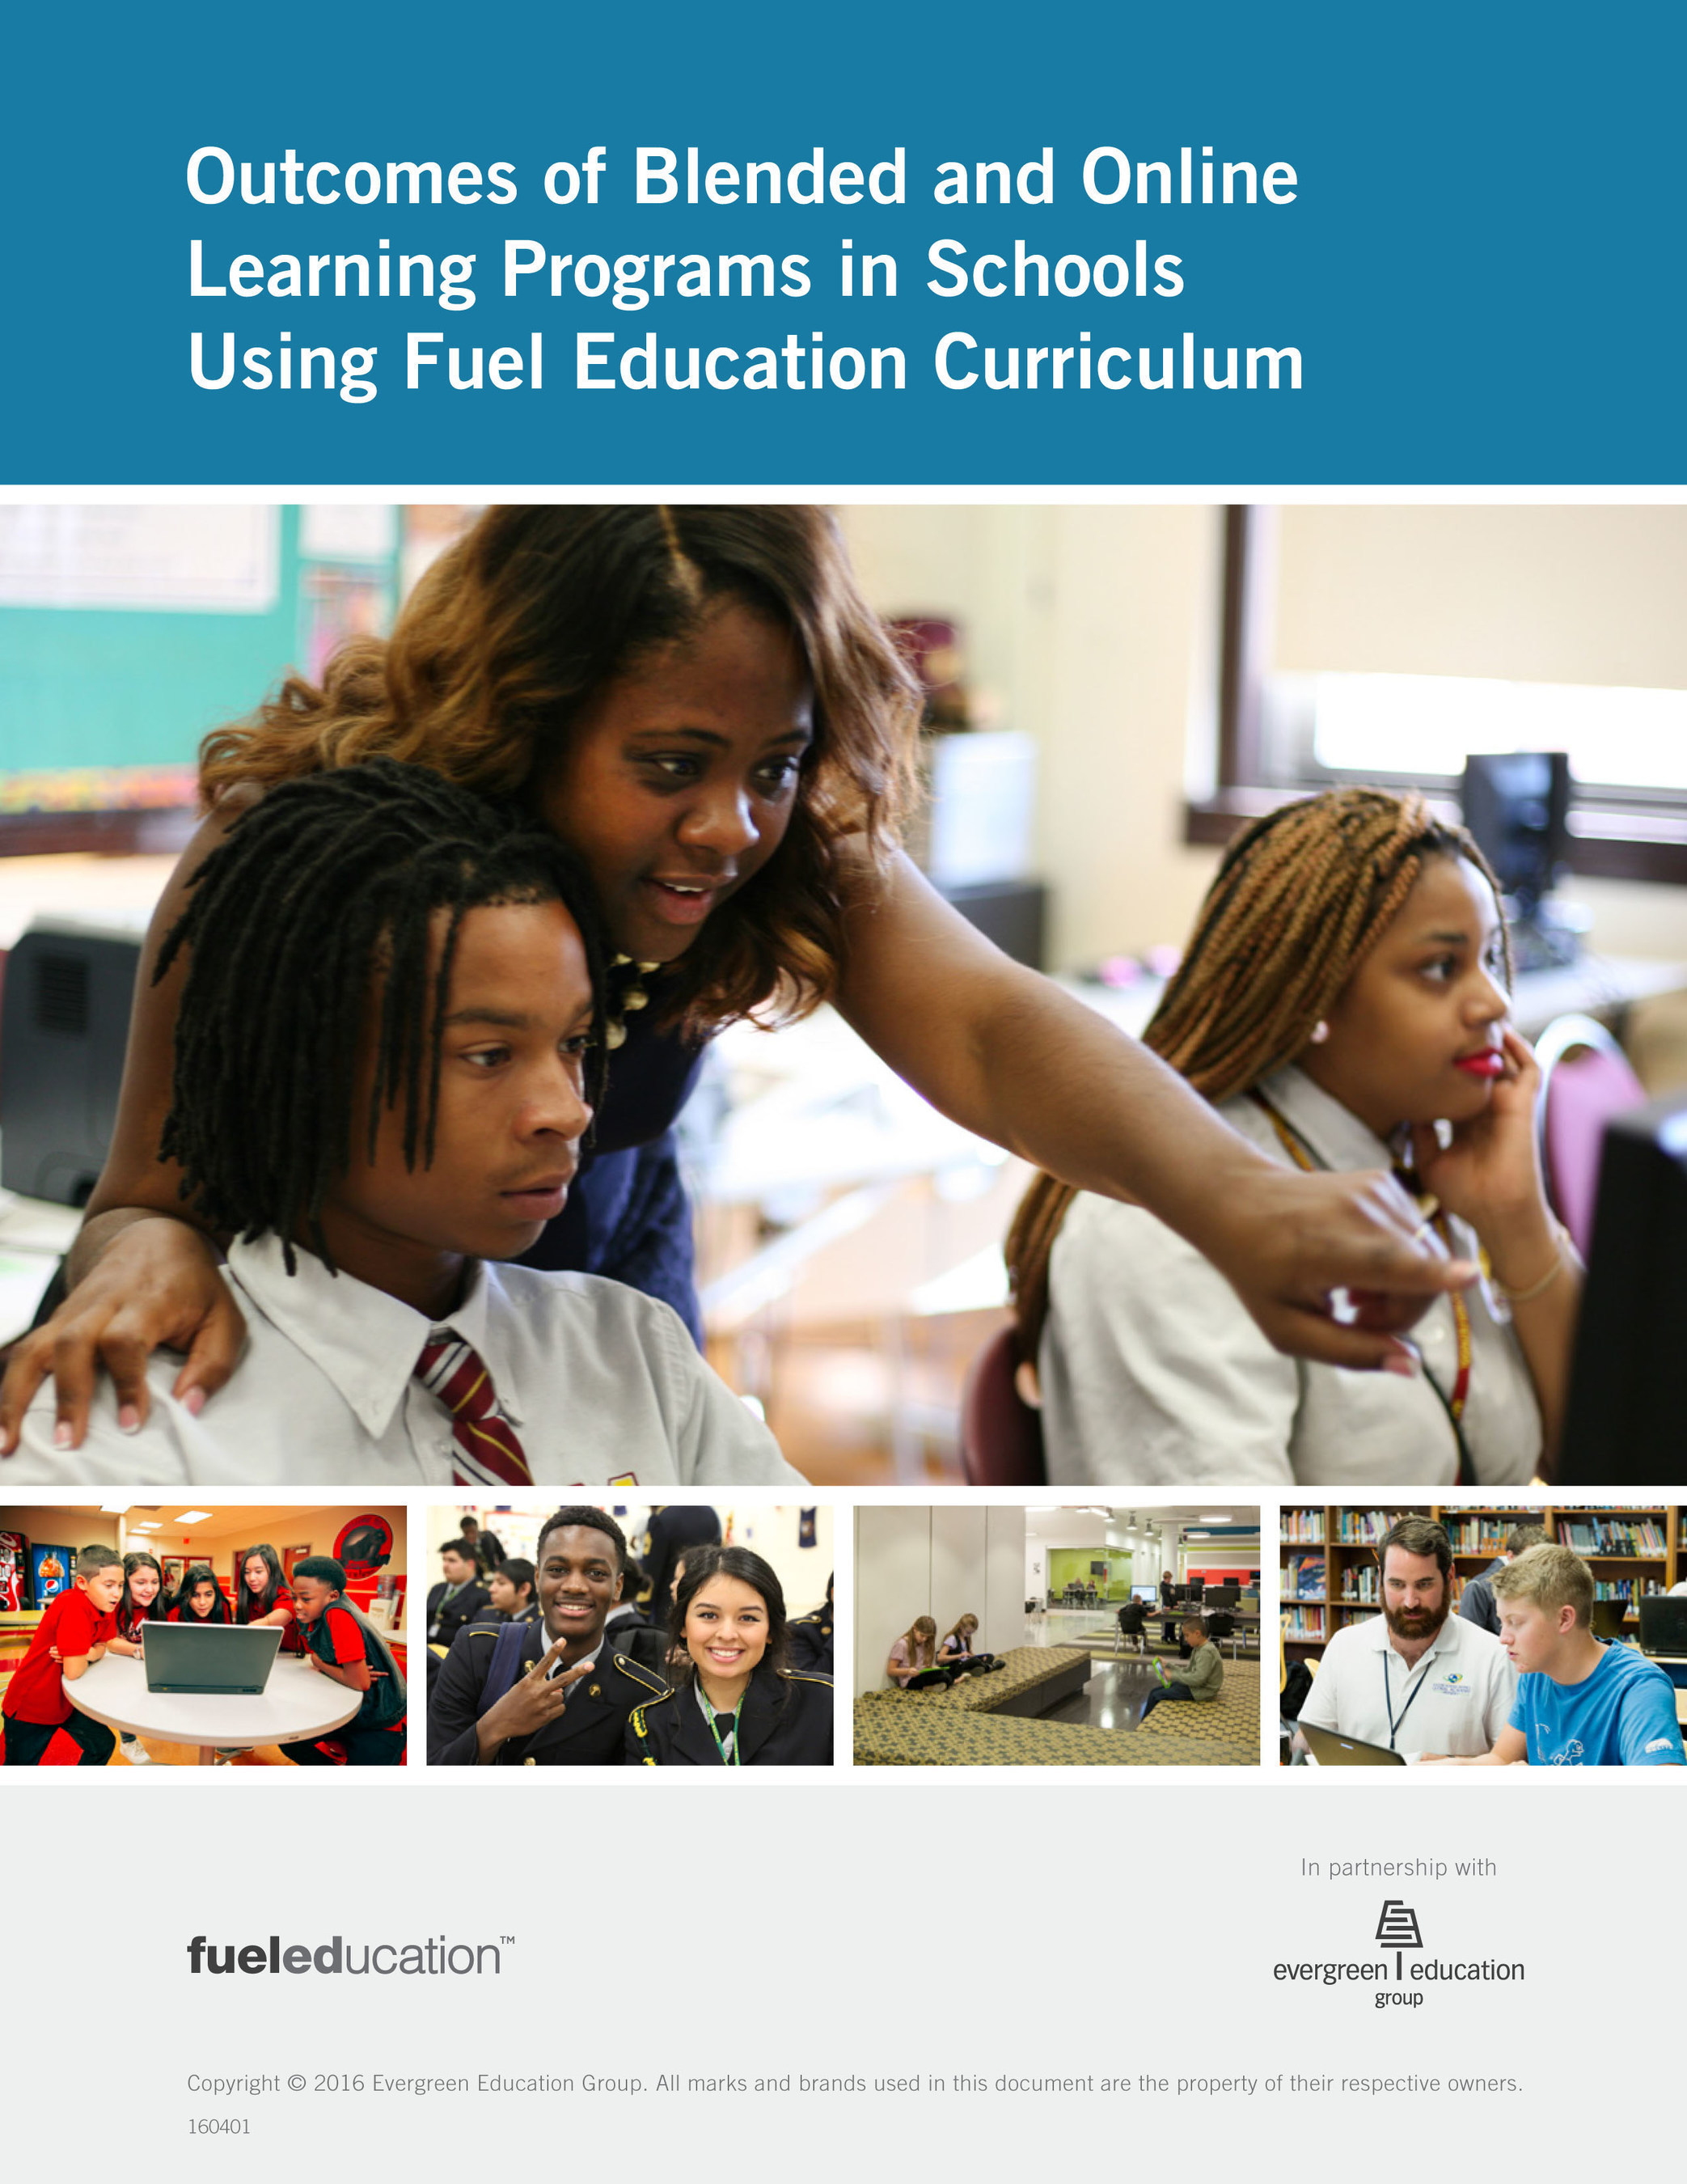 Evergreen Education Group Report on Nine Successful Online and Blended Programs